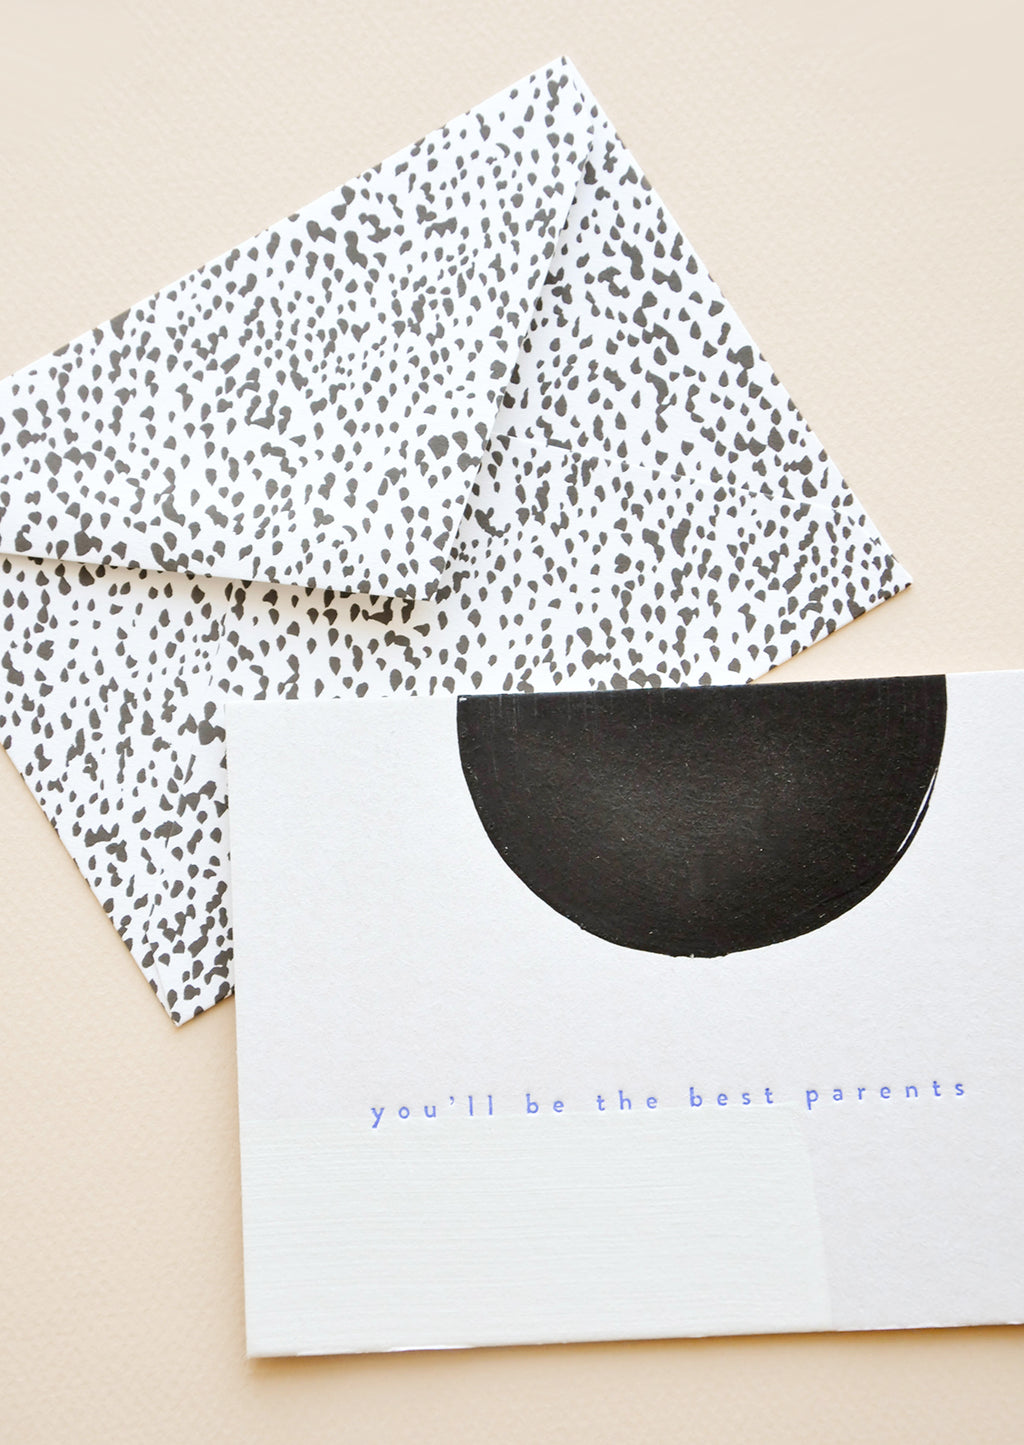 2: A black and white dotted envelope and white greeting card with a black semicircle and the text "you'll be the best parents" in blue.